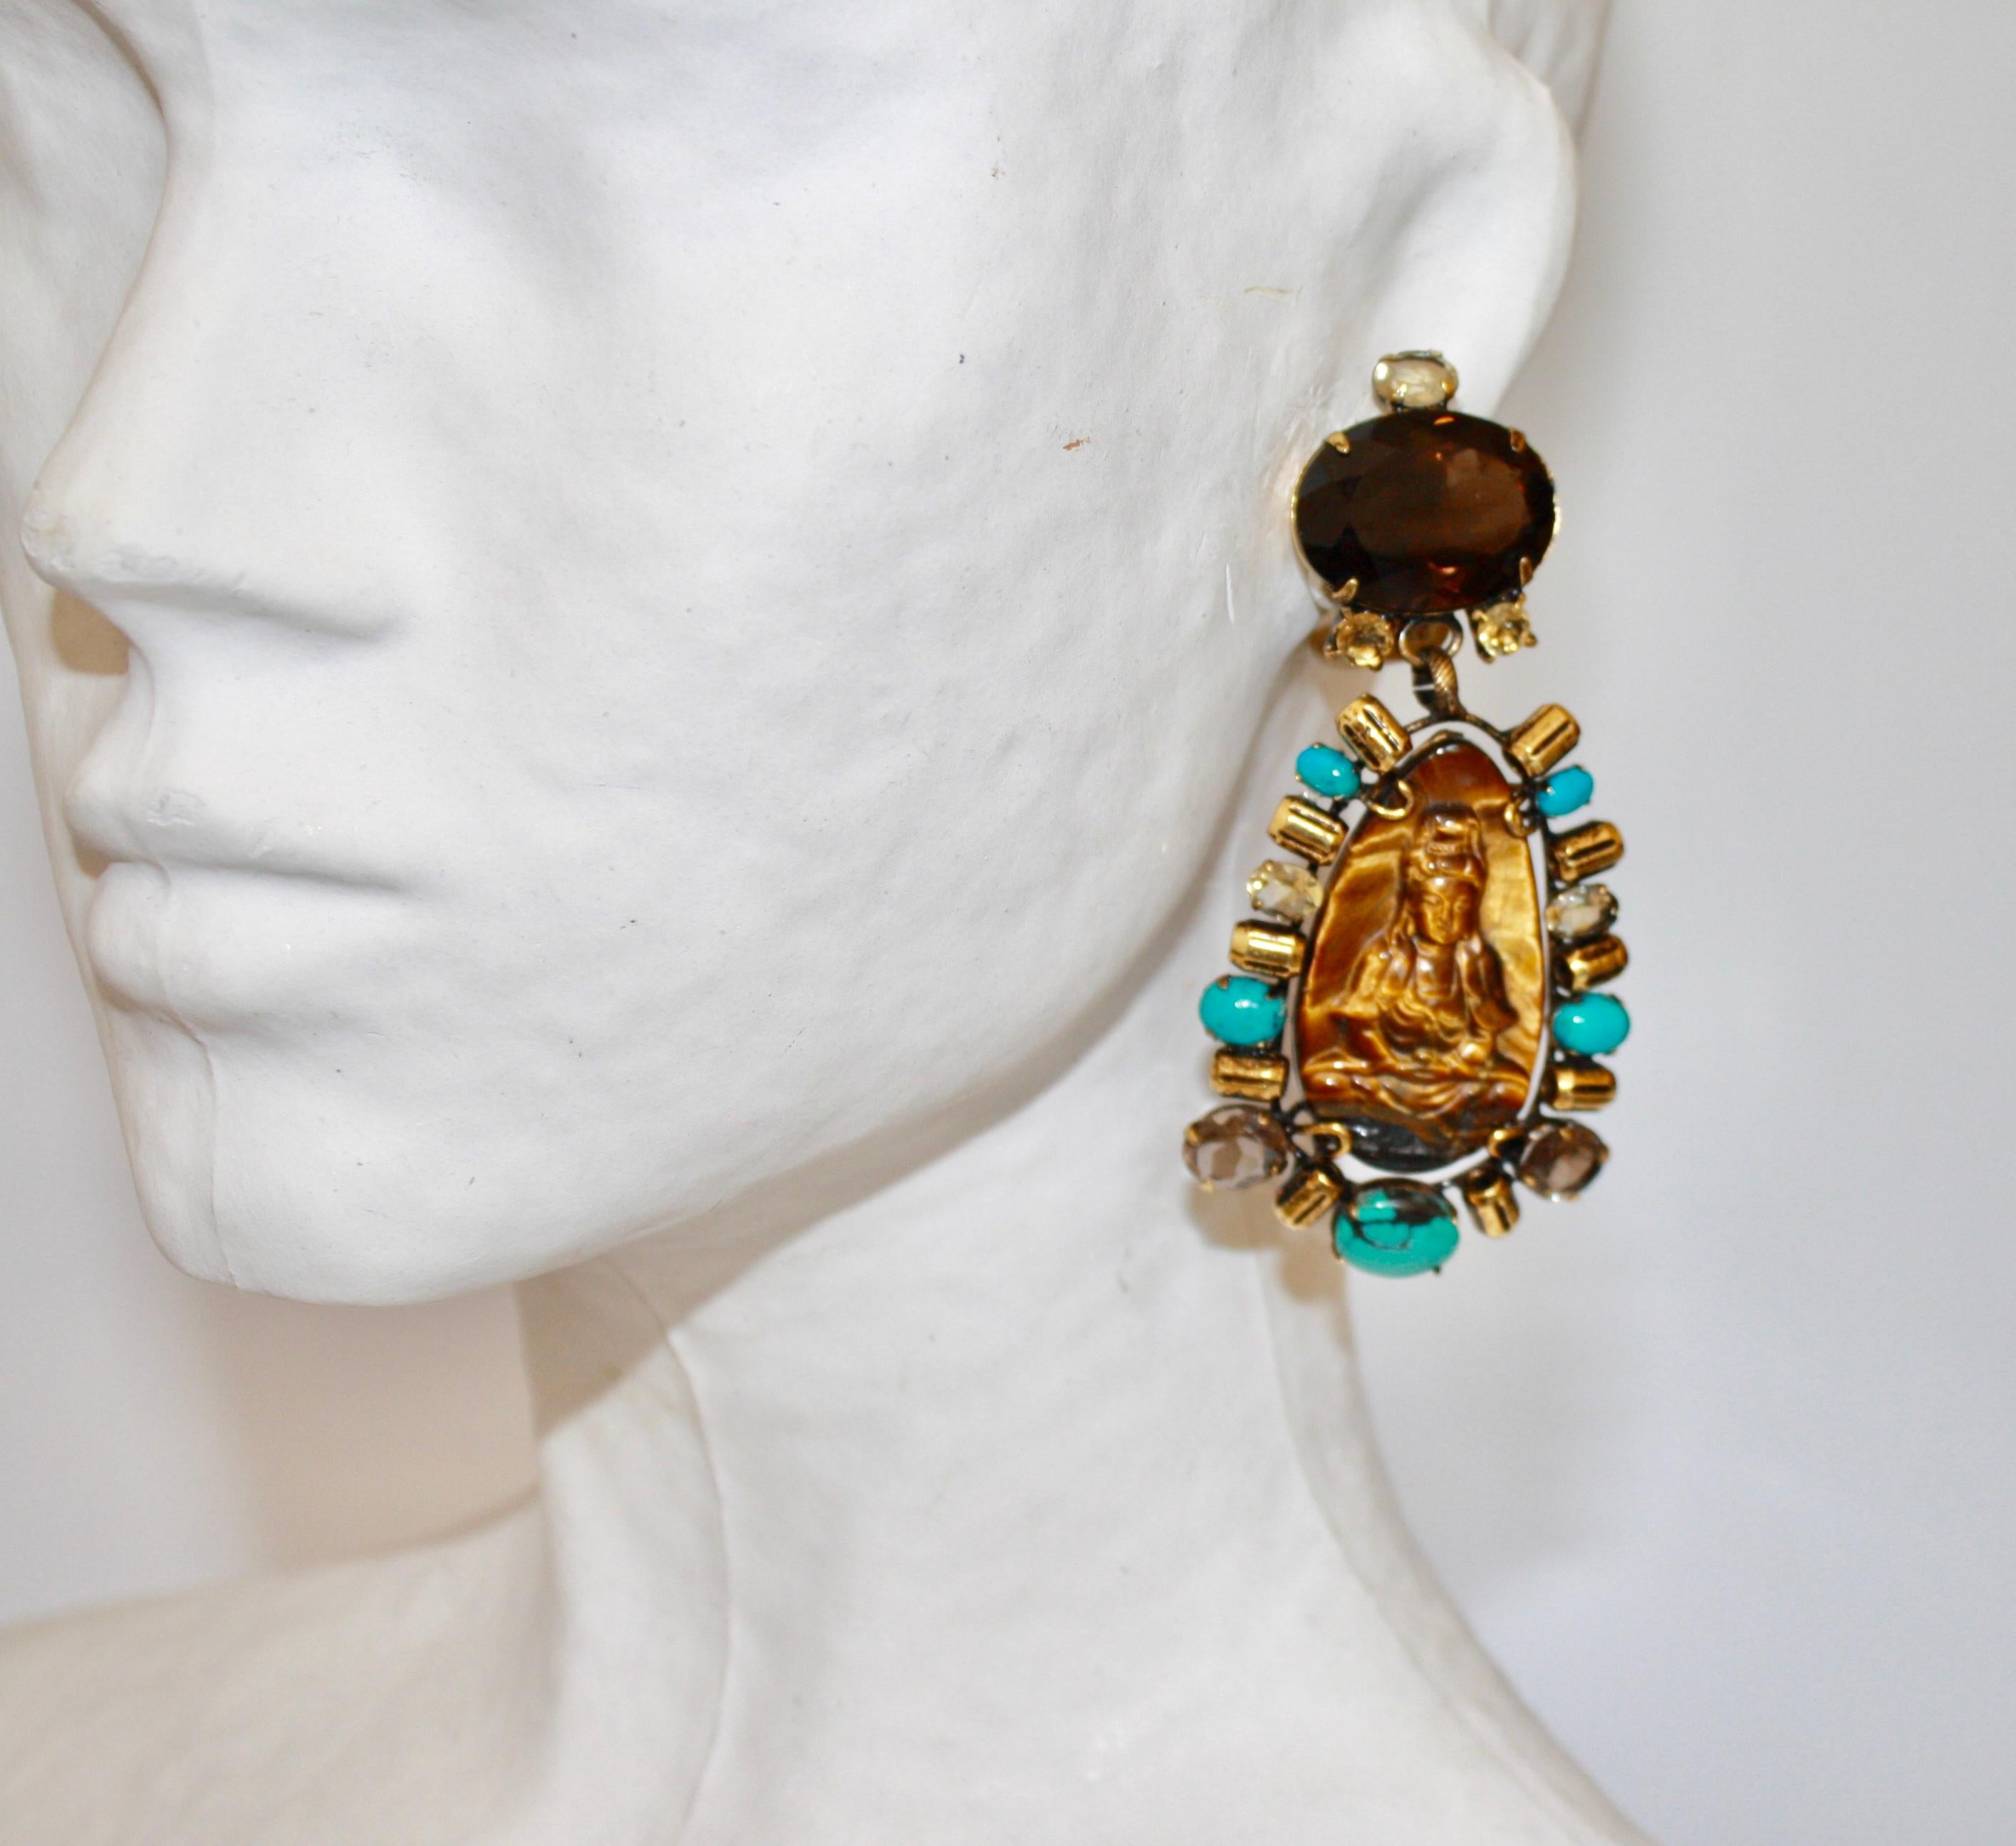 Turquoise, tigers eye, smoky quartz, and lemon quartz clip earrings with carved Buddha motif from Iradj Moini. 